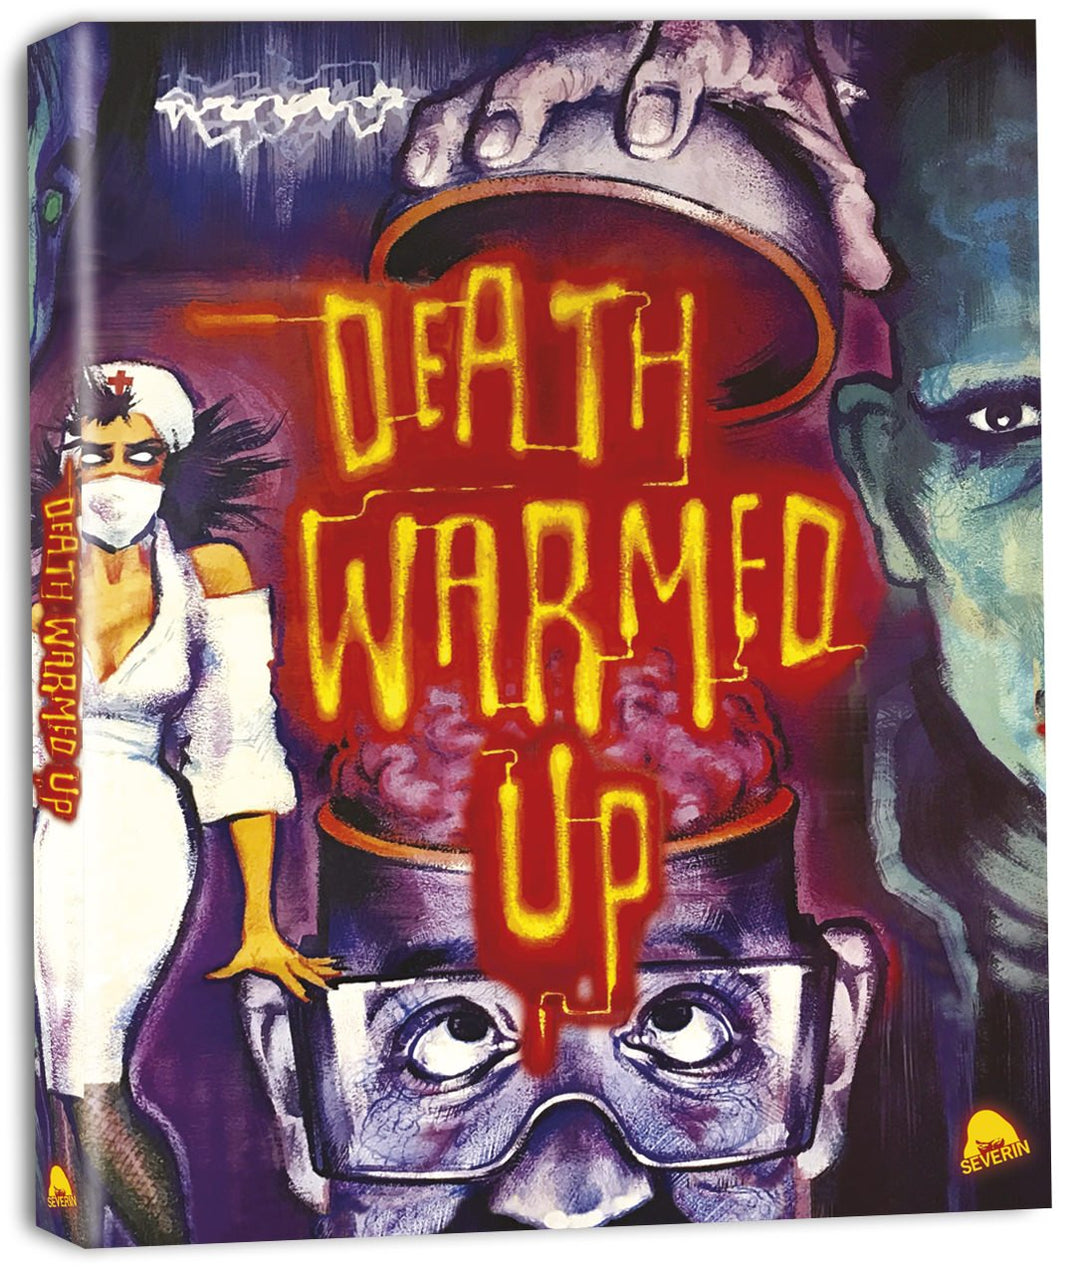 Death Warmed Up [Blu-ray w/Exclusive Slipcover]